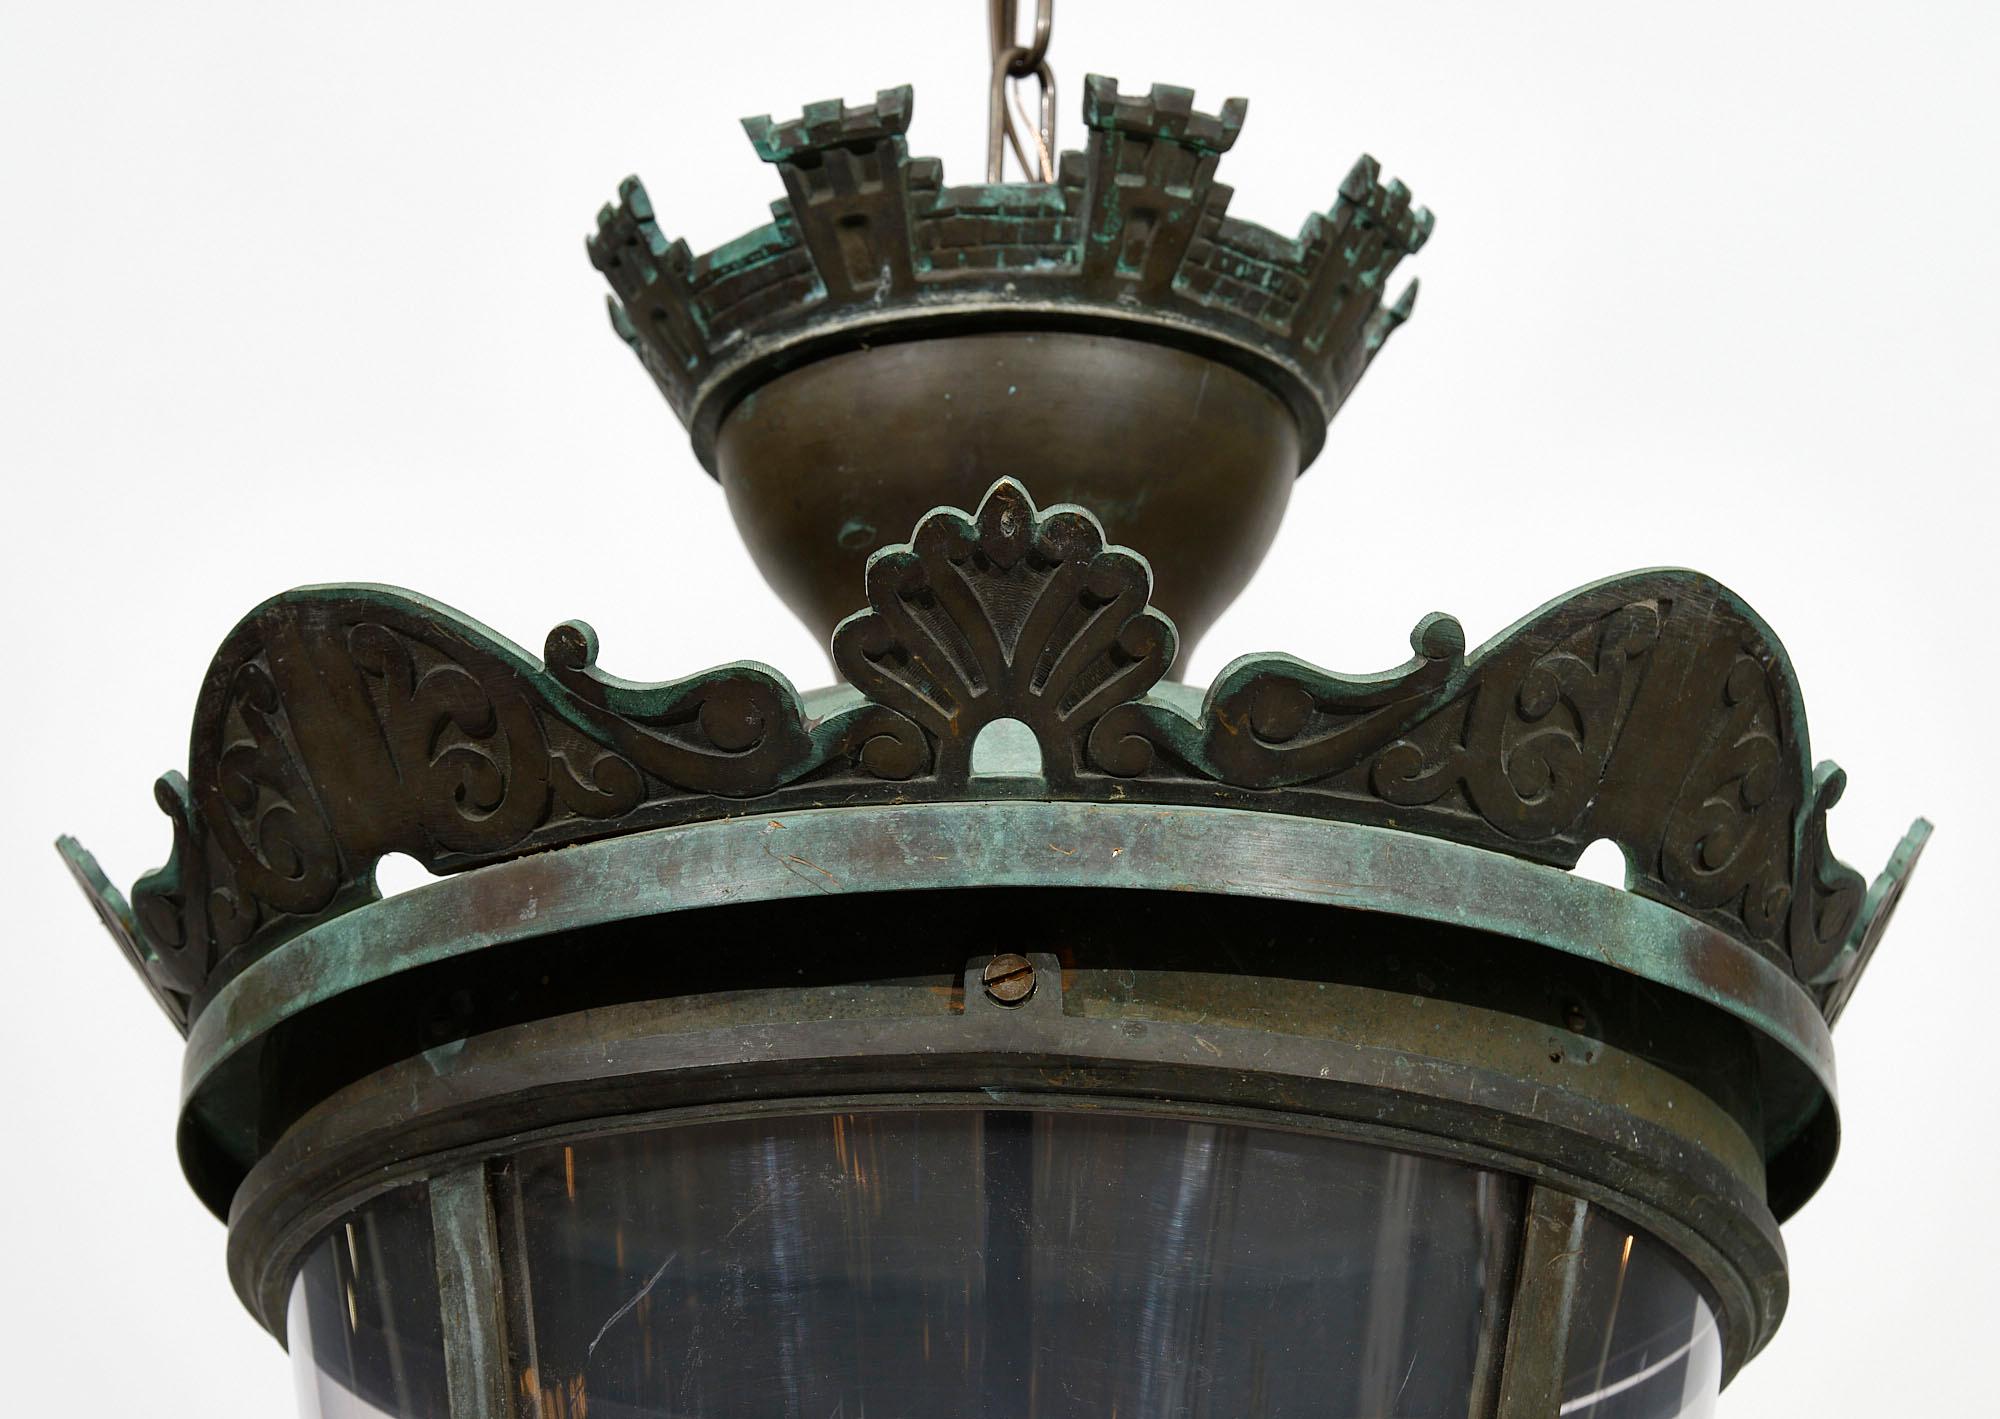 Bronze lantern; French; from around “Opera Garnier” in Paris. It was originally lit with gas. This was installed in the French capital by the architect Haussmann when Paris was completely re-conceived. It has been fully rewired to US standards.